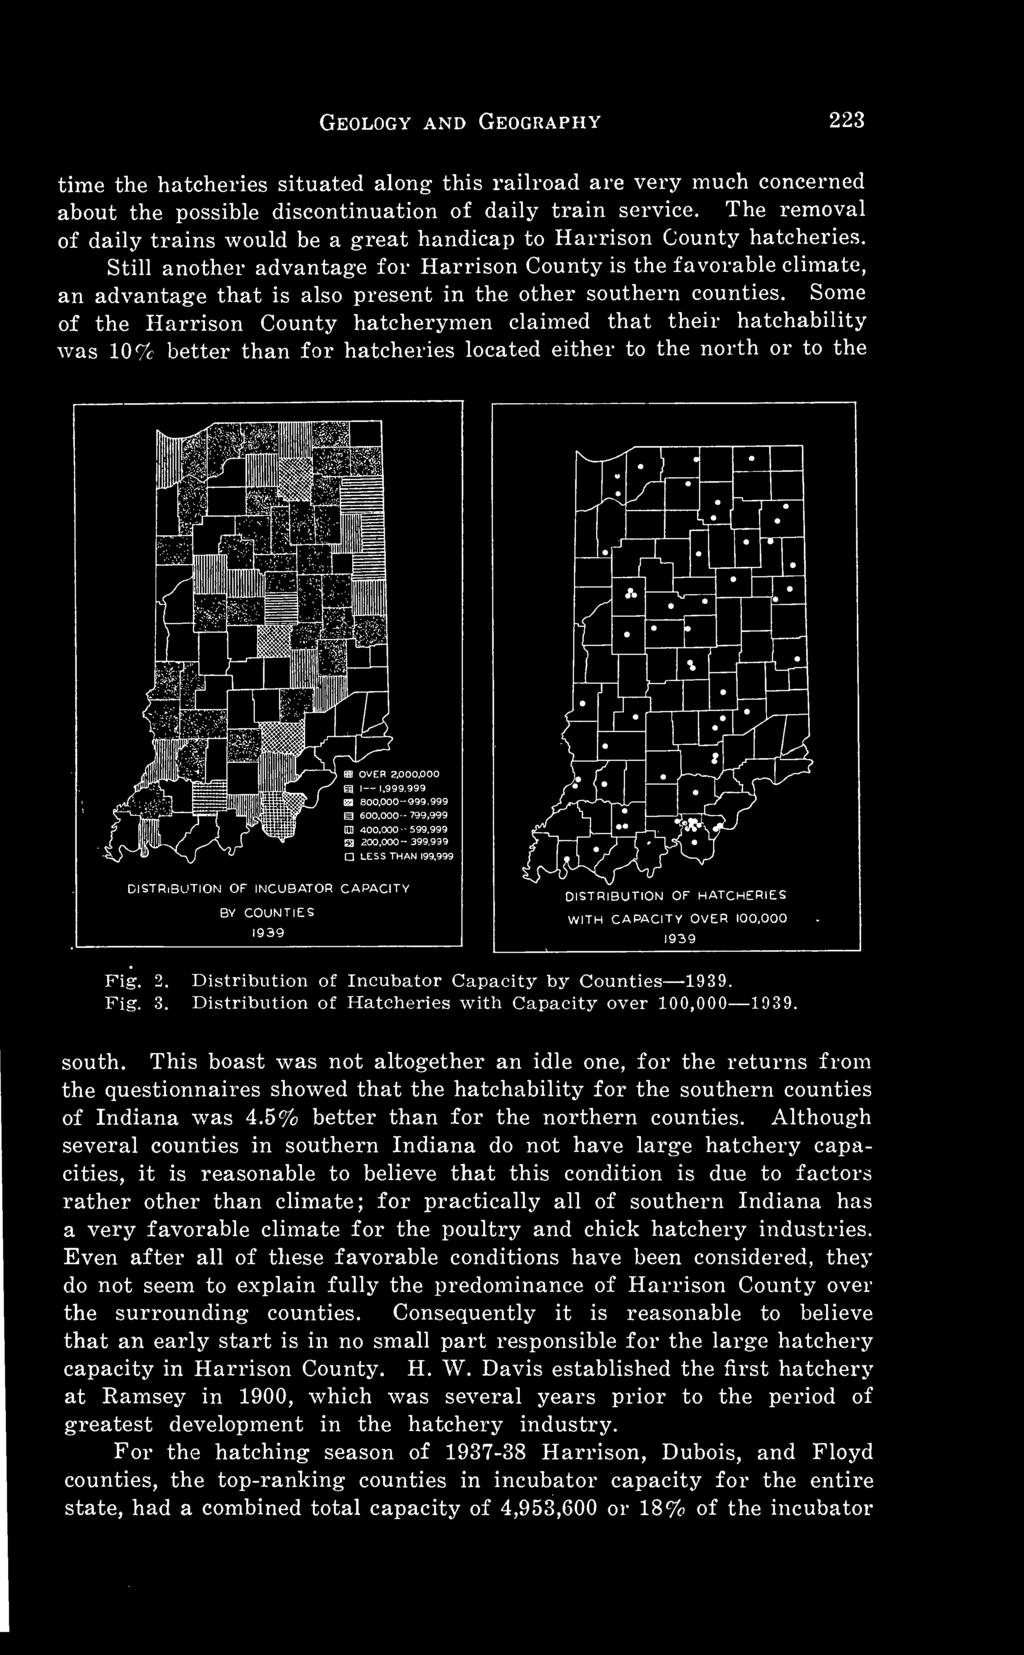 939 Q LESS THAN 199,999 DISTRIBUTION OF INCUBATOR CAPACITY BY COUNTIES 1939 DISTRIBUTION OF HATCHERIES WITH CAPACITY OVER 100,000 1939 Fig. 2. Distribution of Incubator Capacity by Counties 1939. Fig. 3.